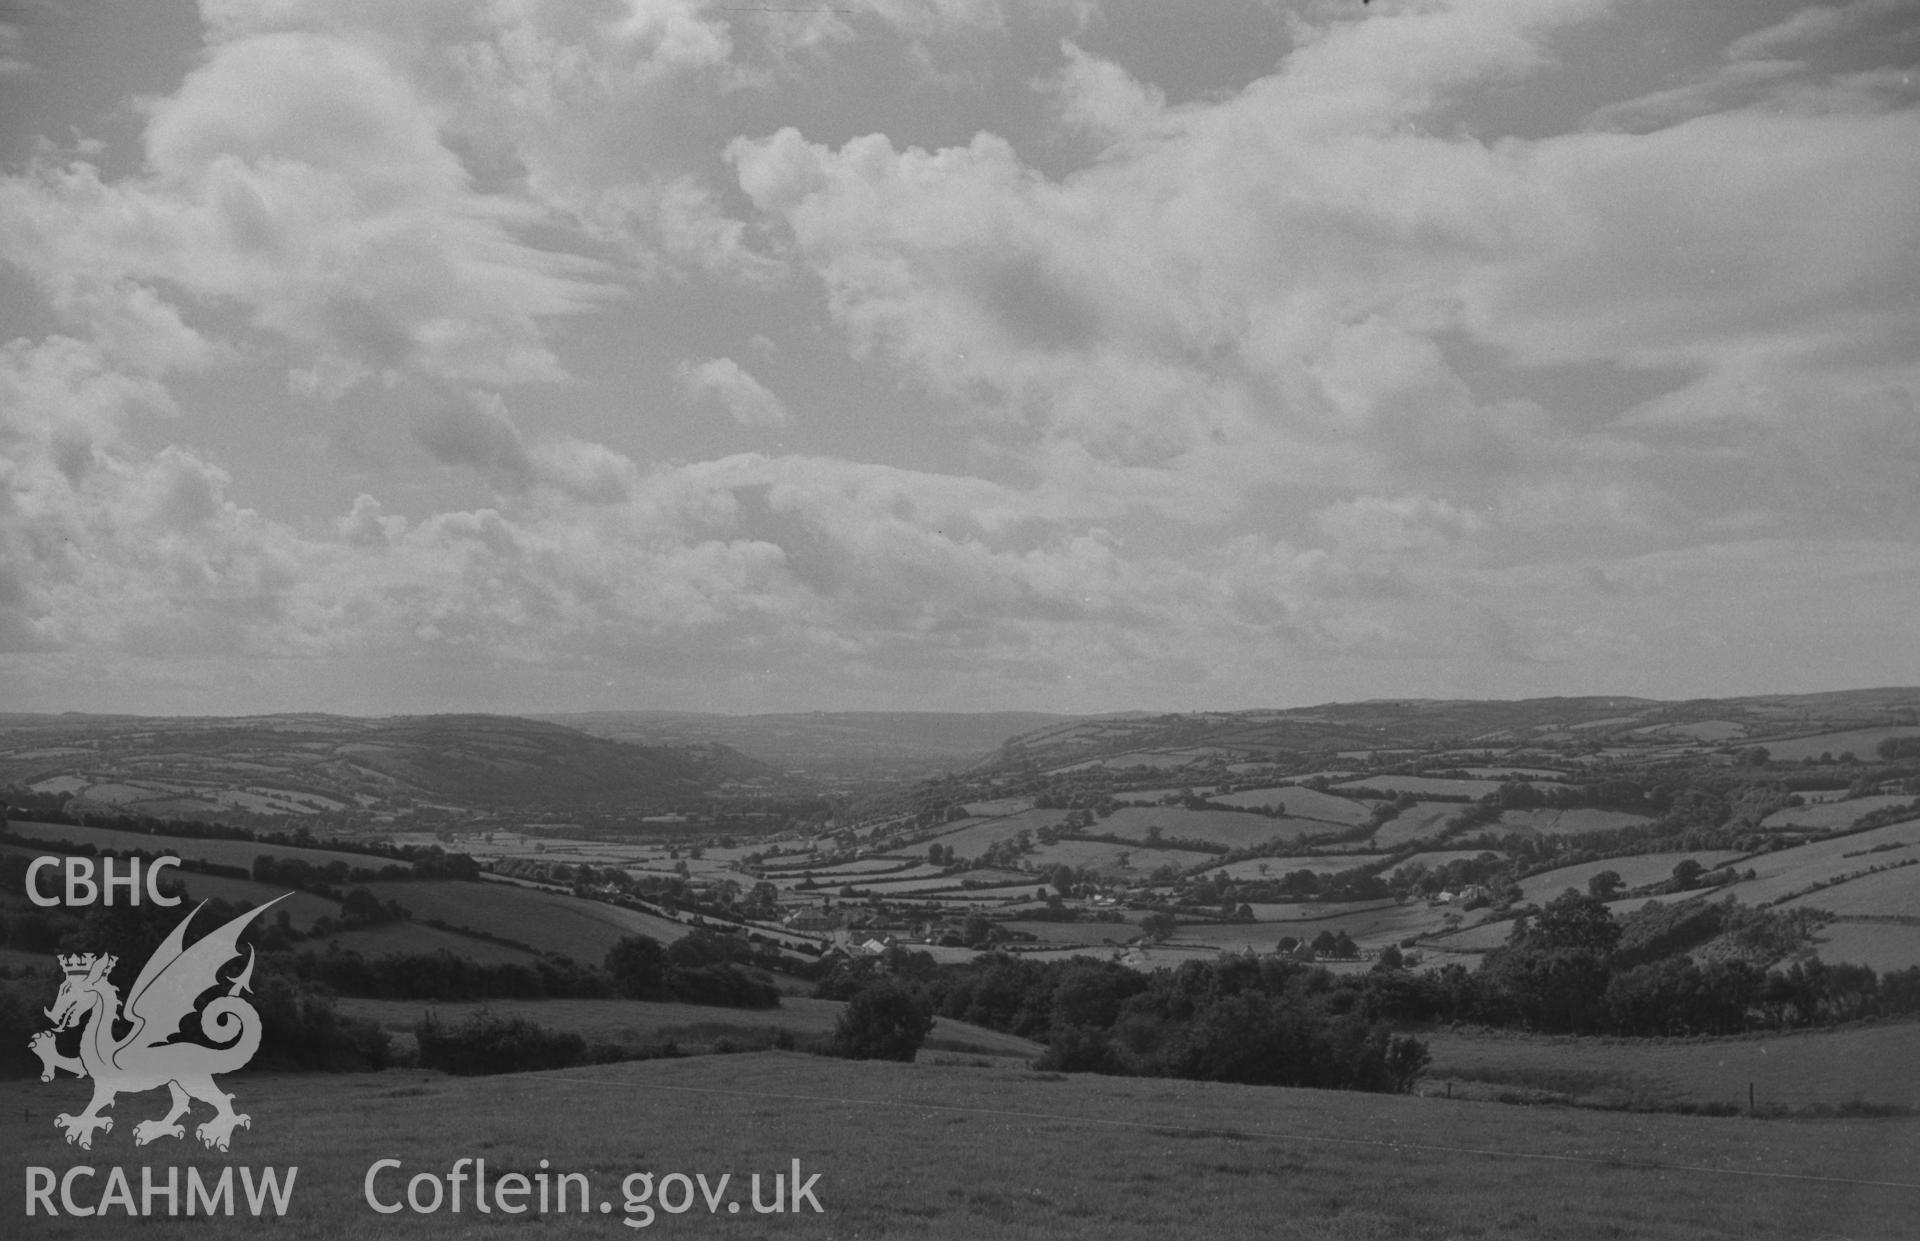 Digital copy of black and white negative showing view of Llangeitho and the Aeron valley from bank of lane at bottom of Llanbadarn-Odwyn churchyard. Photographed by Arthur O. Chater on 2nd September 1967 looking south west from Grid Ref SN 634 605.